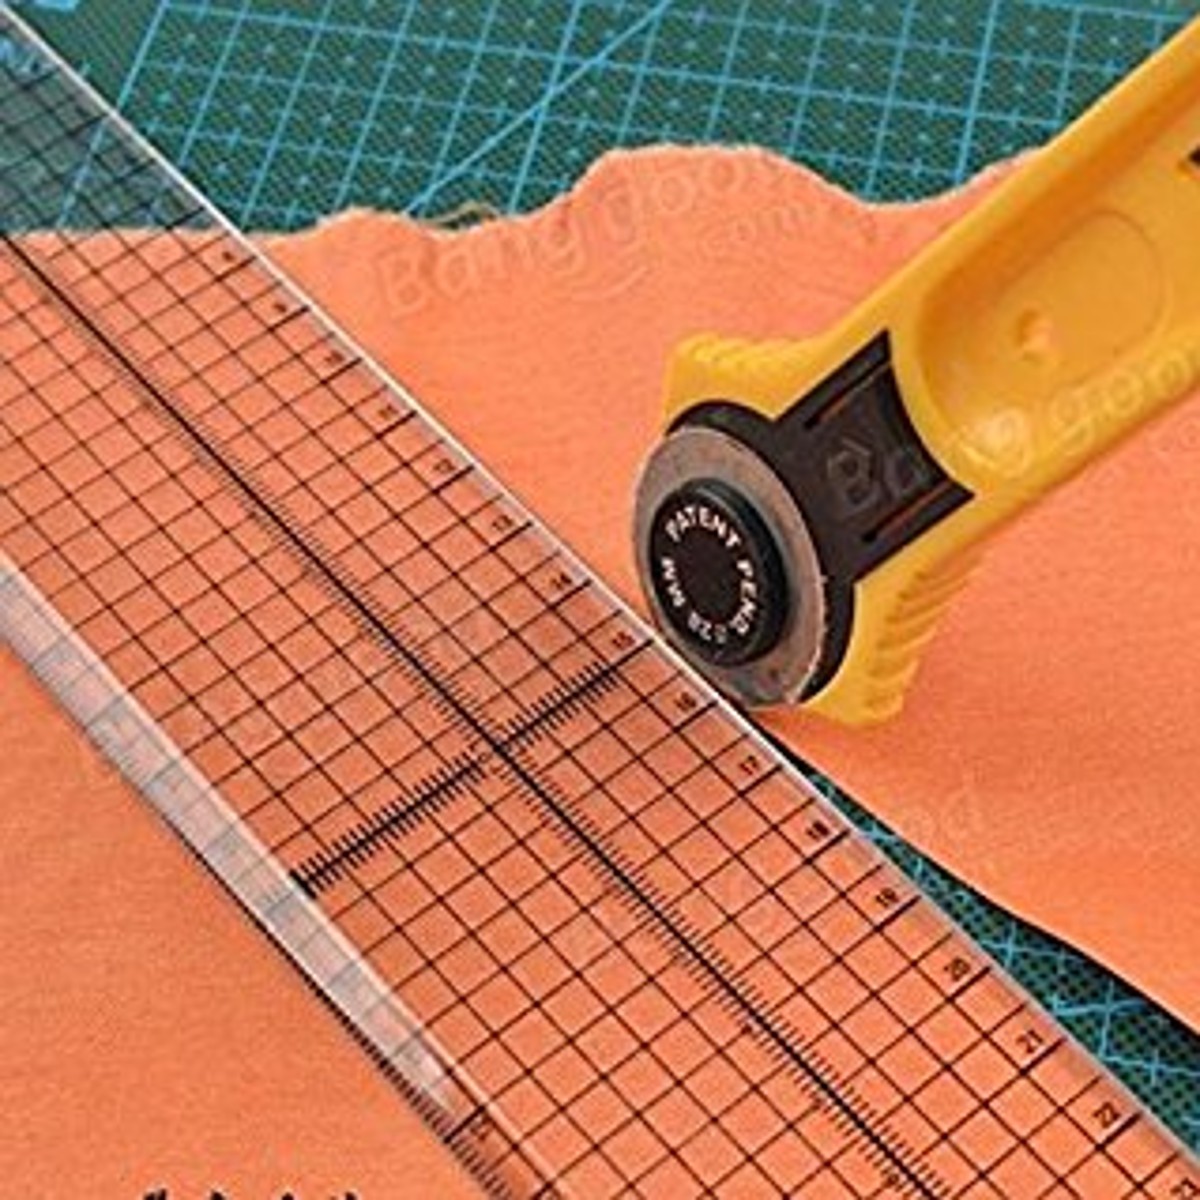 Sewing-Patchwork-Ruler-Quilting-Foot-Aligned-Grid-Cutting-Edge-for-Tailor-Craft-1122687-4